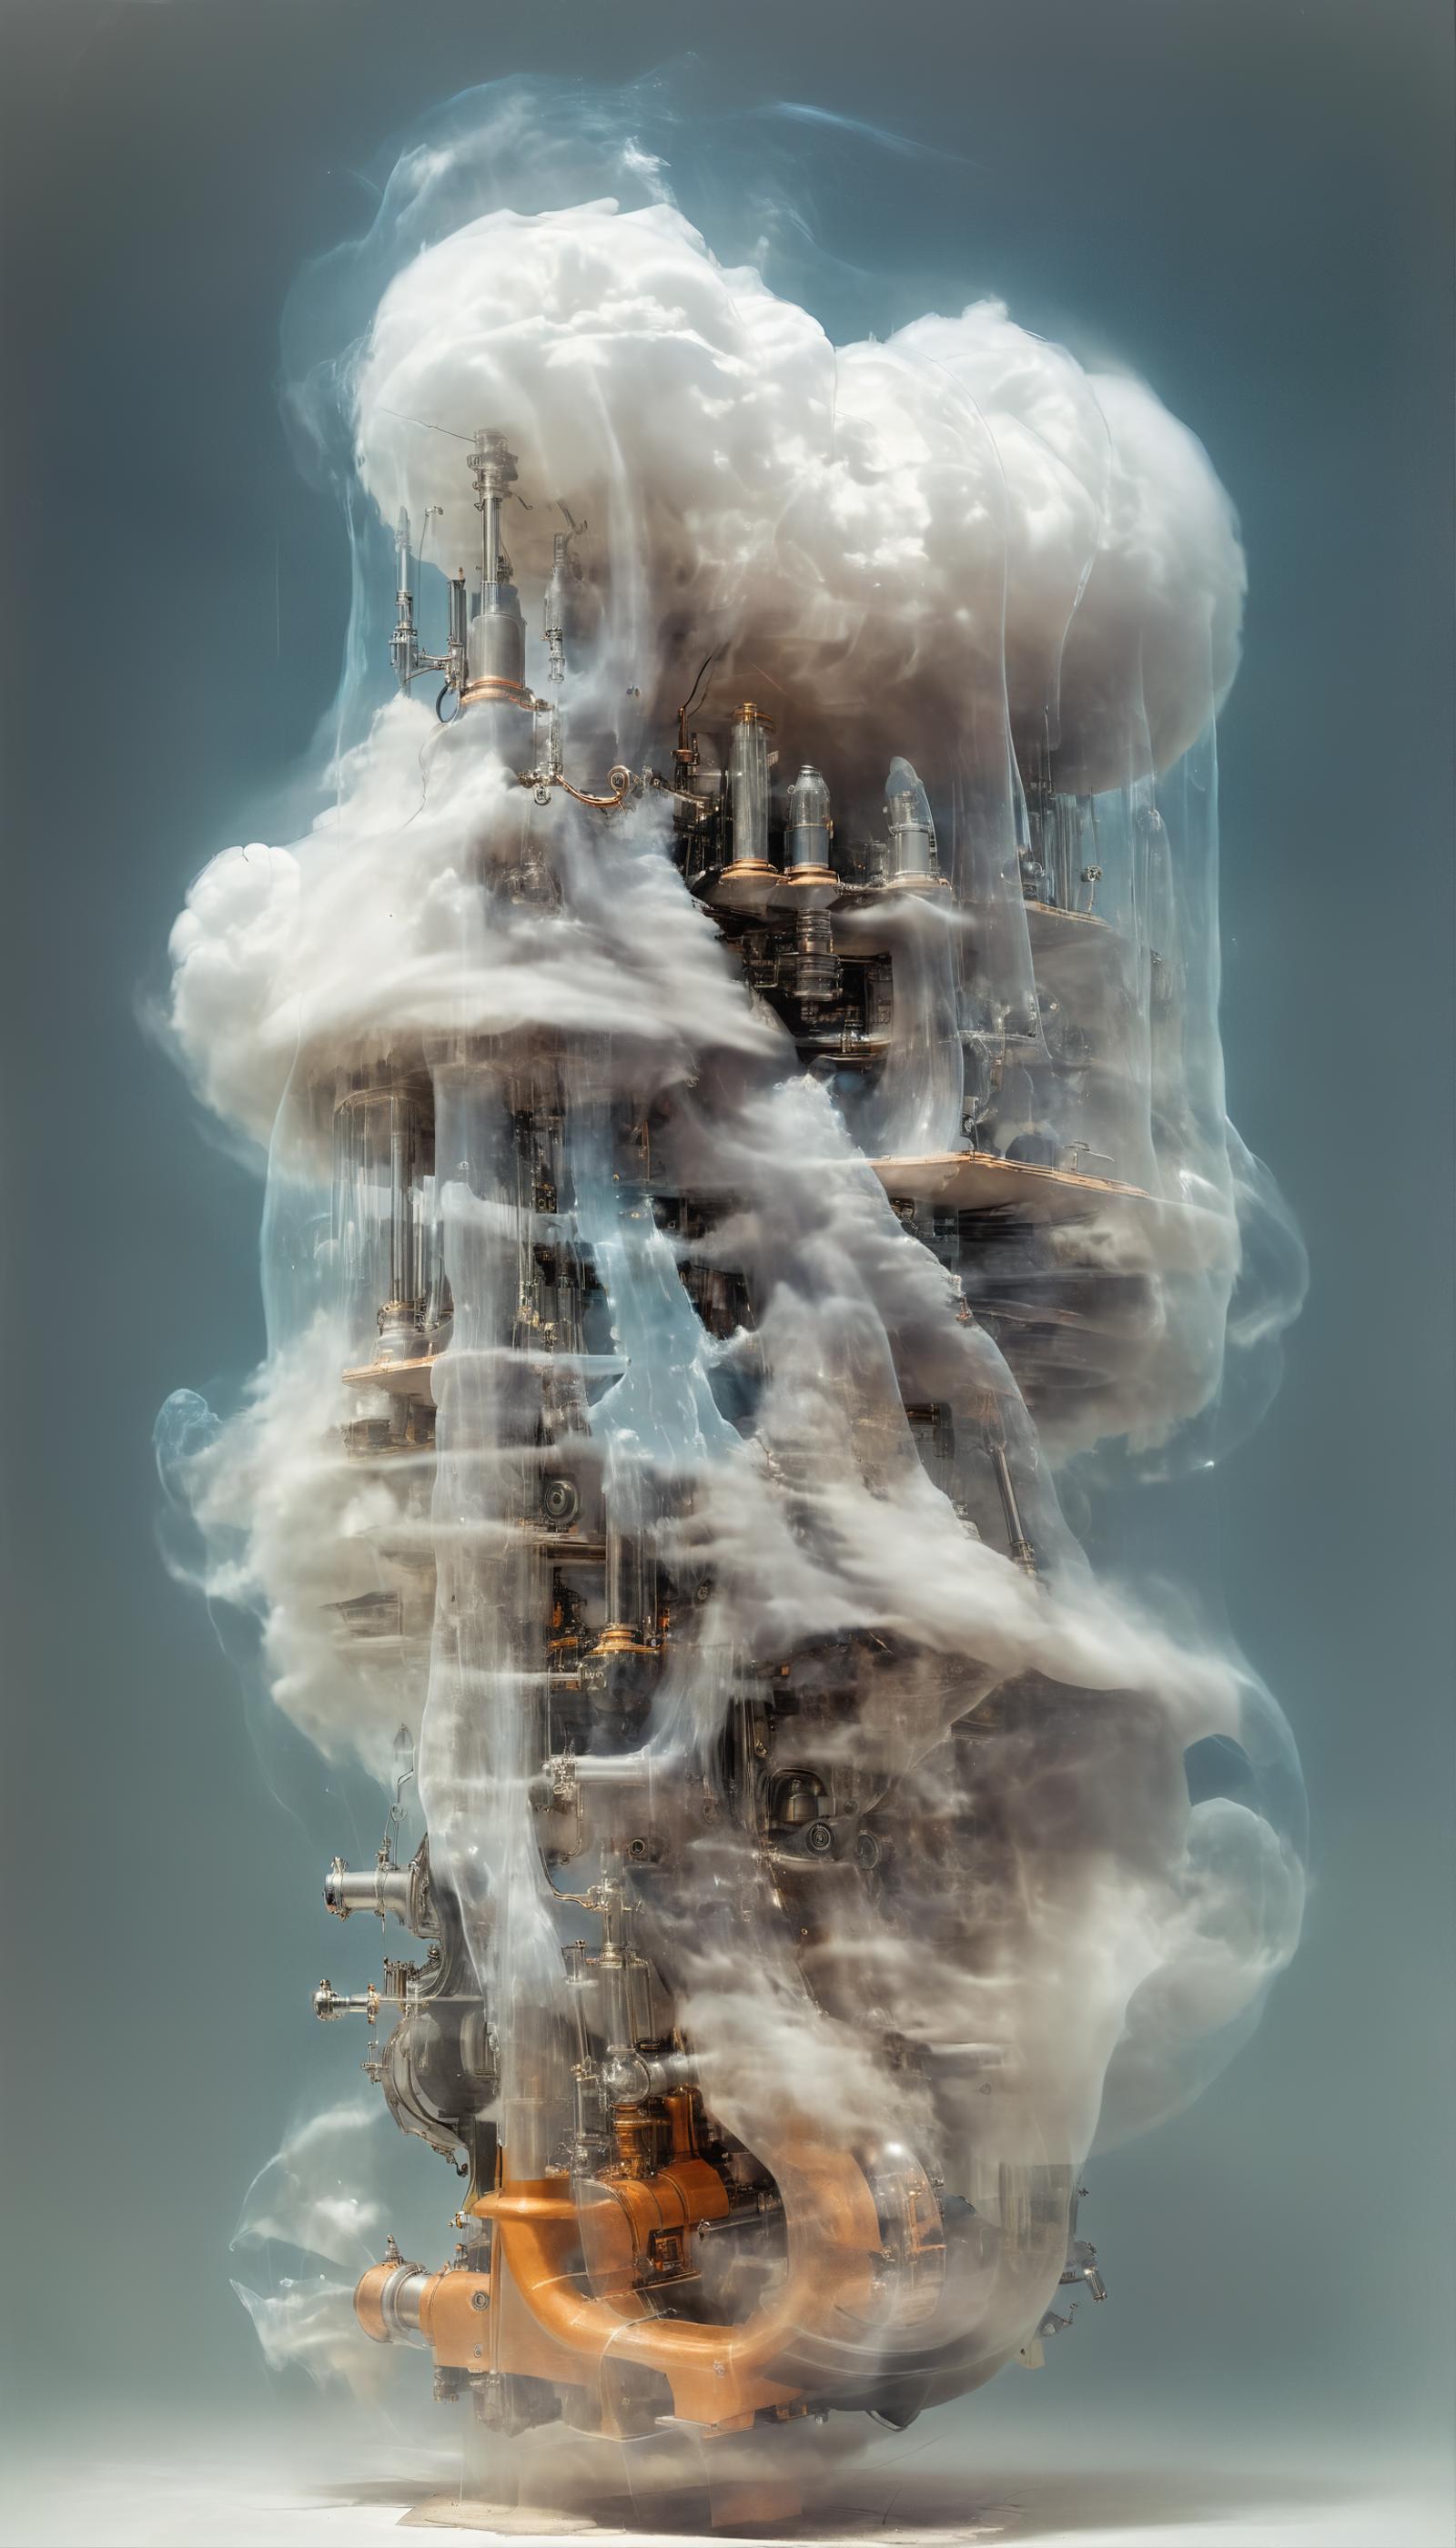 A towering cloudy structure with machinery inside.